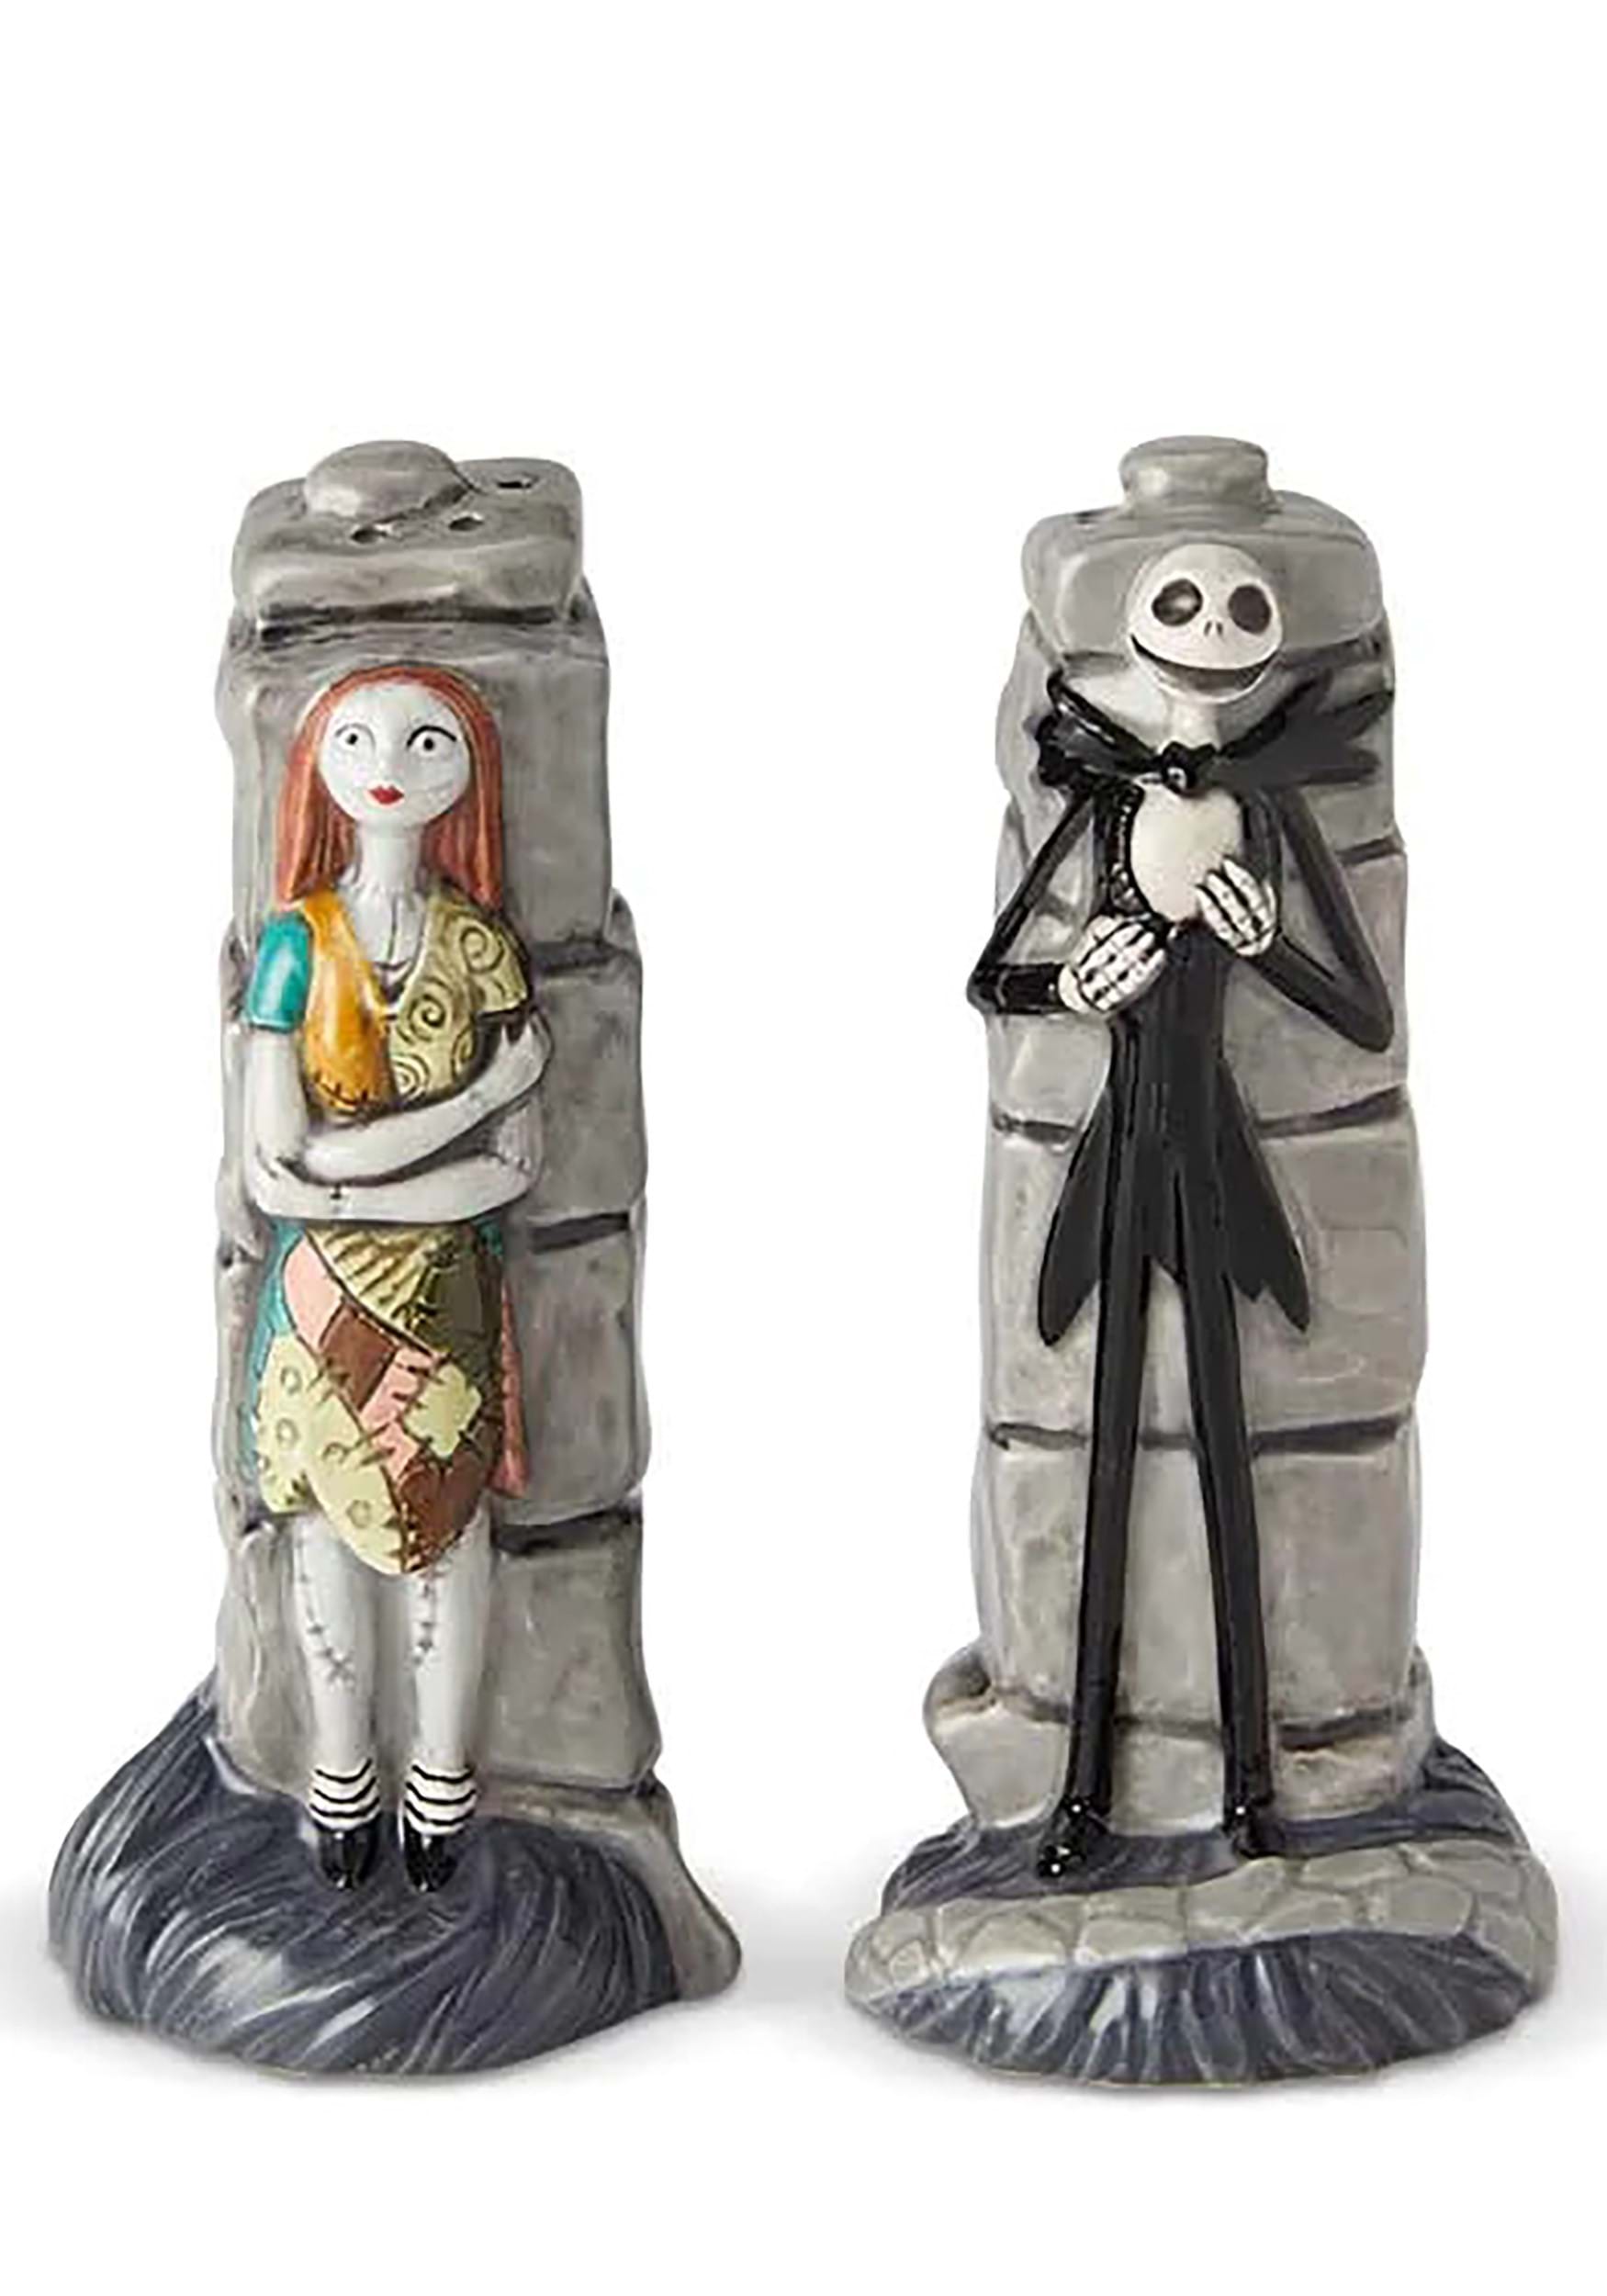 https://images.fun.com/products/82122/1-1/nightmare-before-christmas-jack-skellington-and-sa.jpg